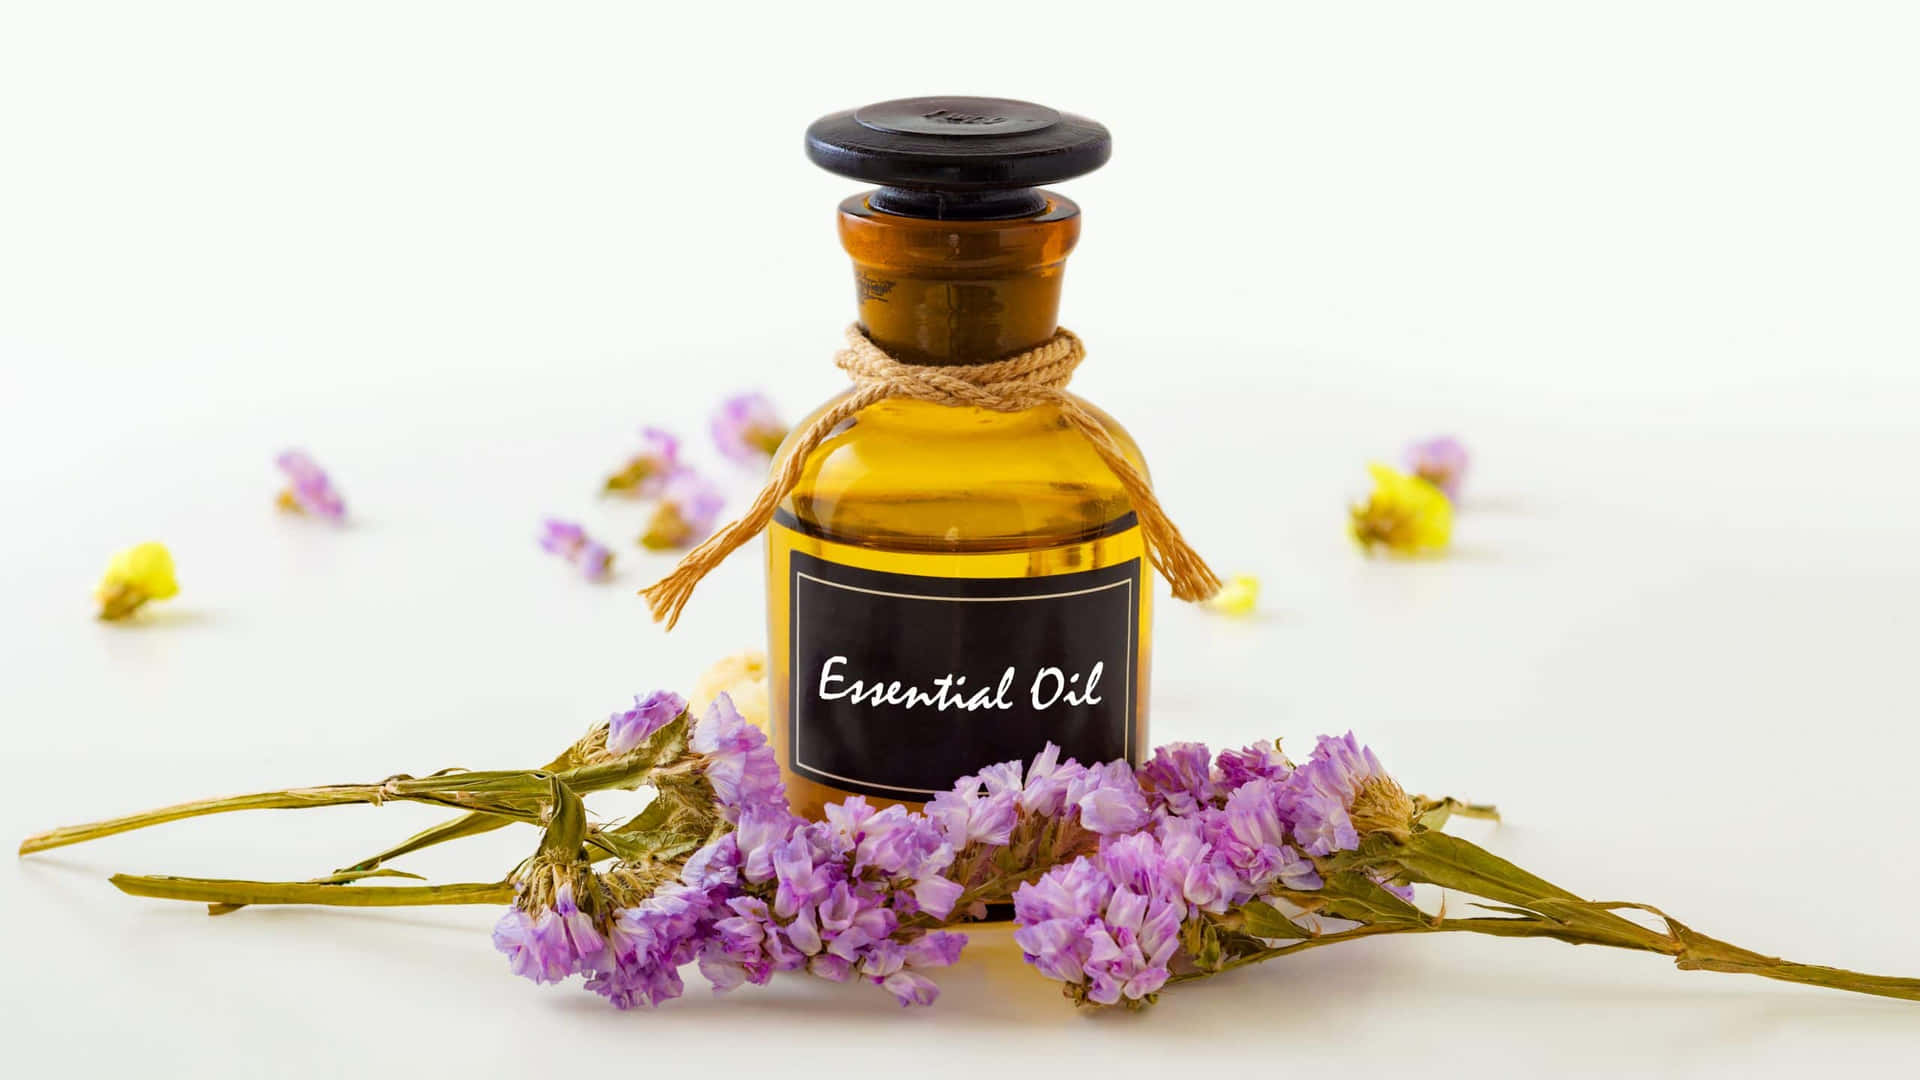 Get your mind, body and spirit aligned with Essential Oils Wallpaper